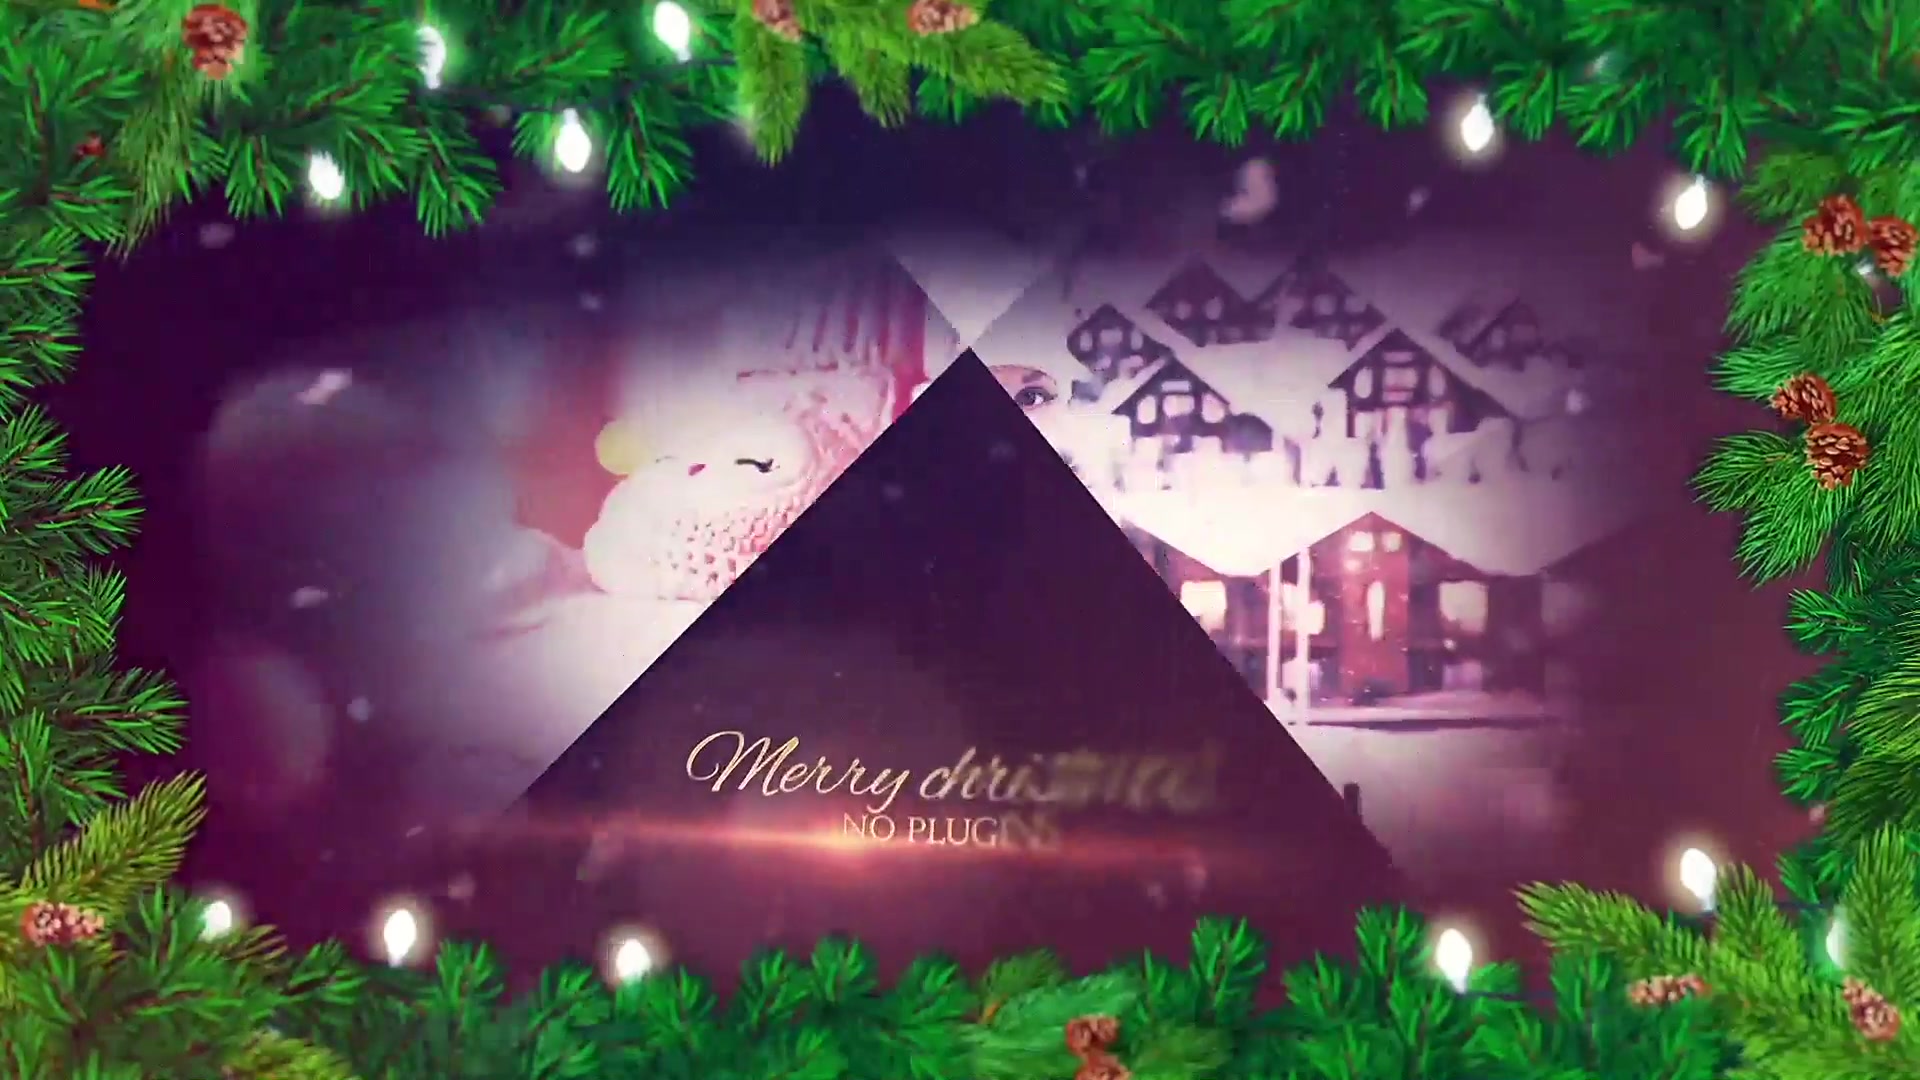 Christmas Slideshow Pack 8in1 - Download Videohive 22878599